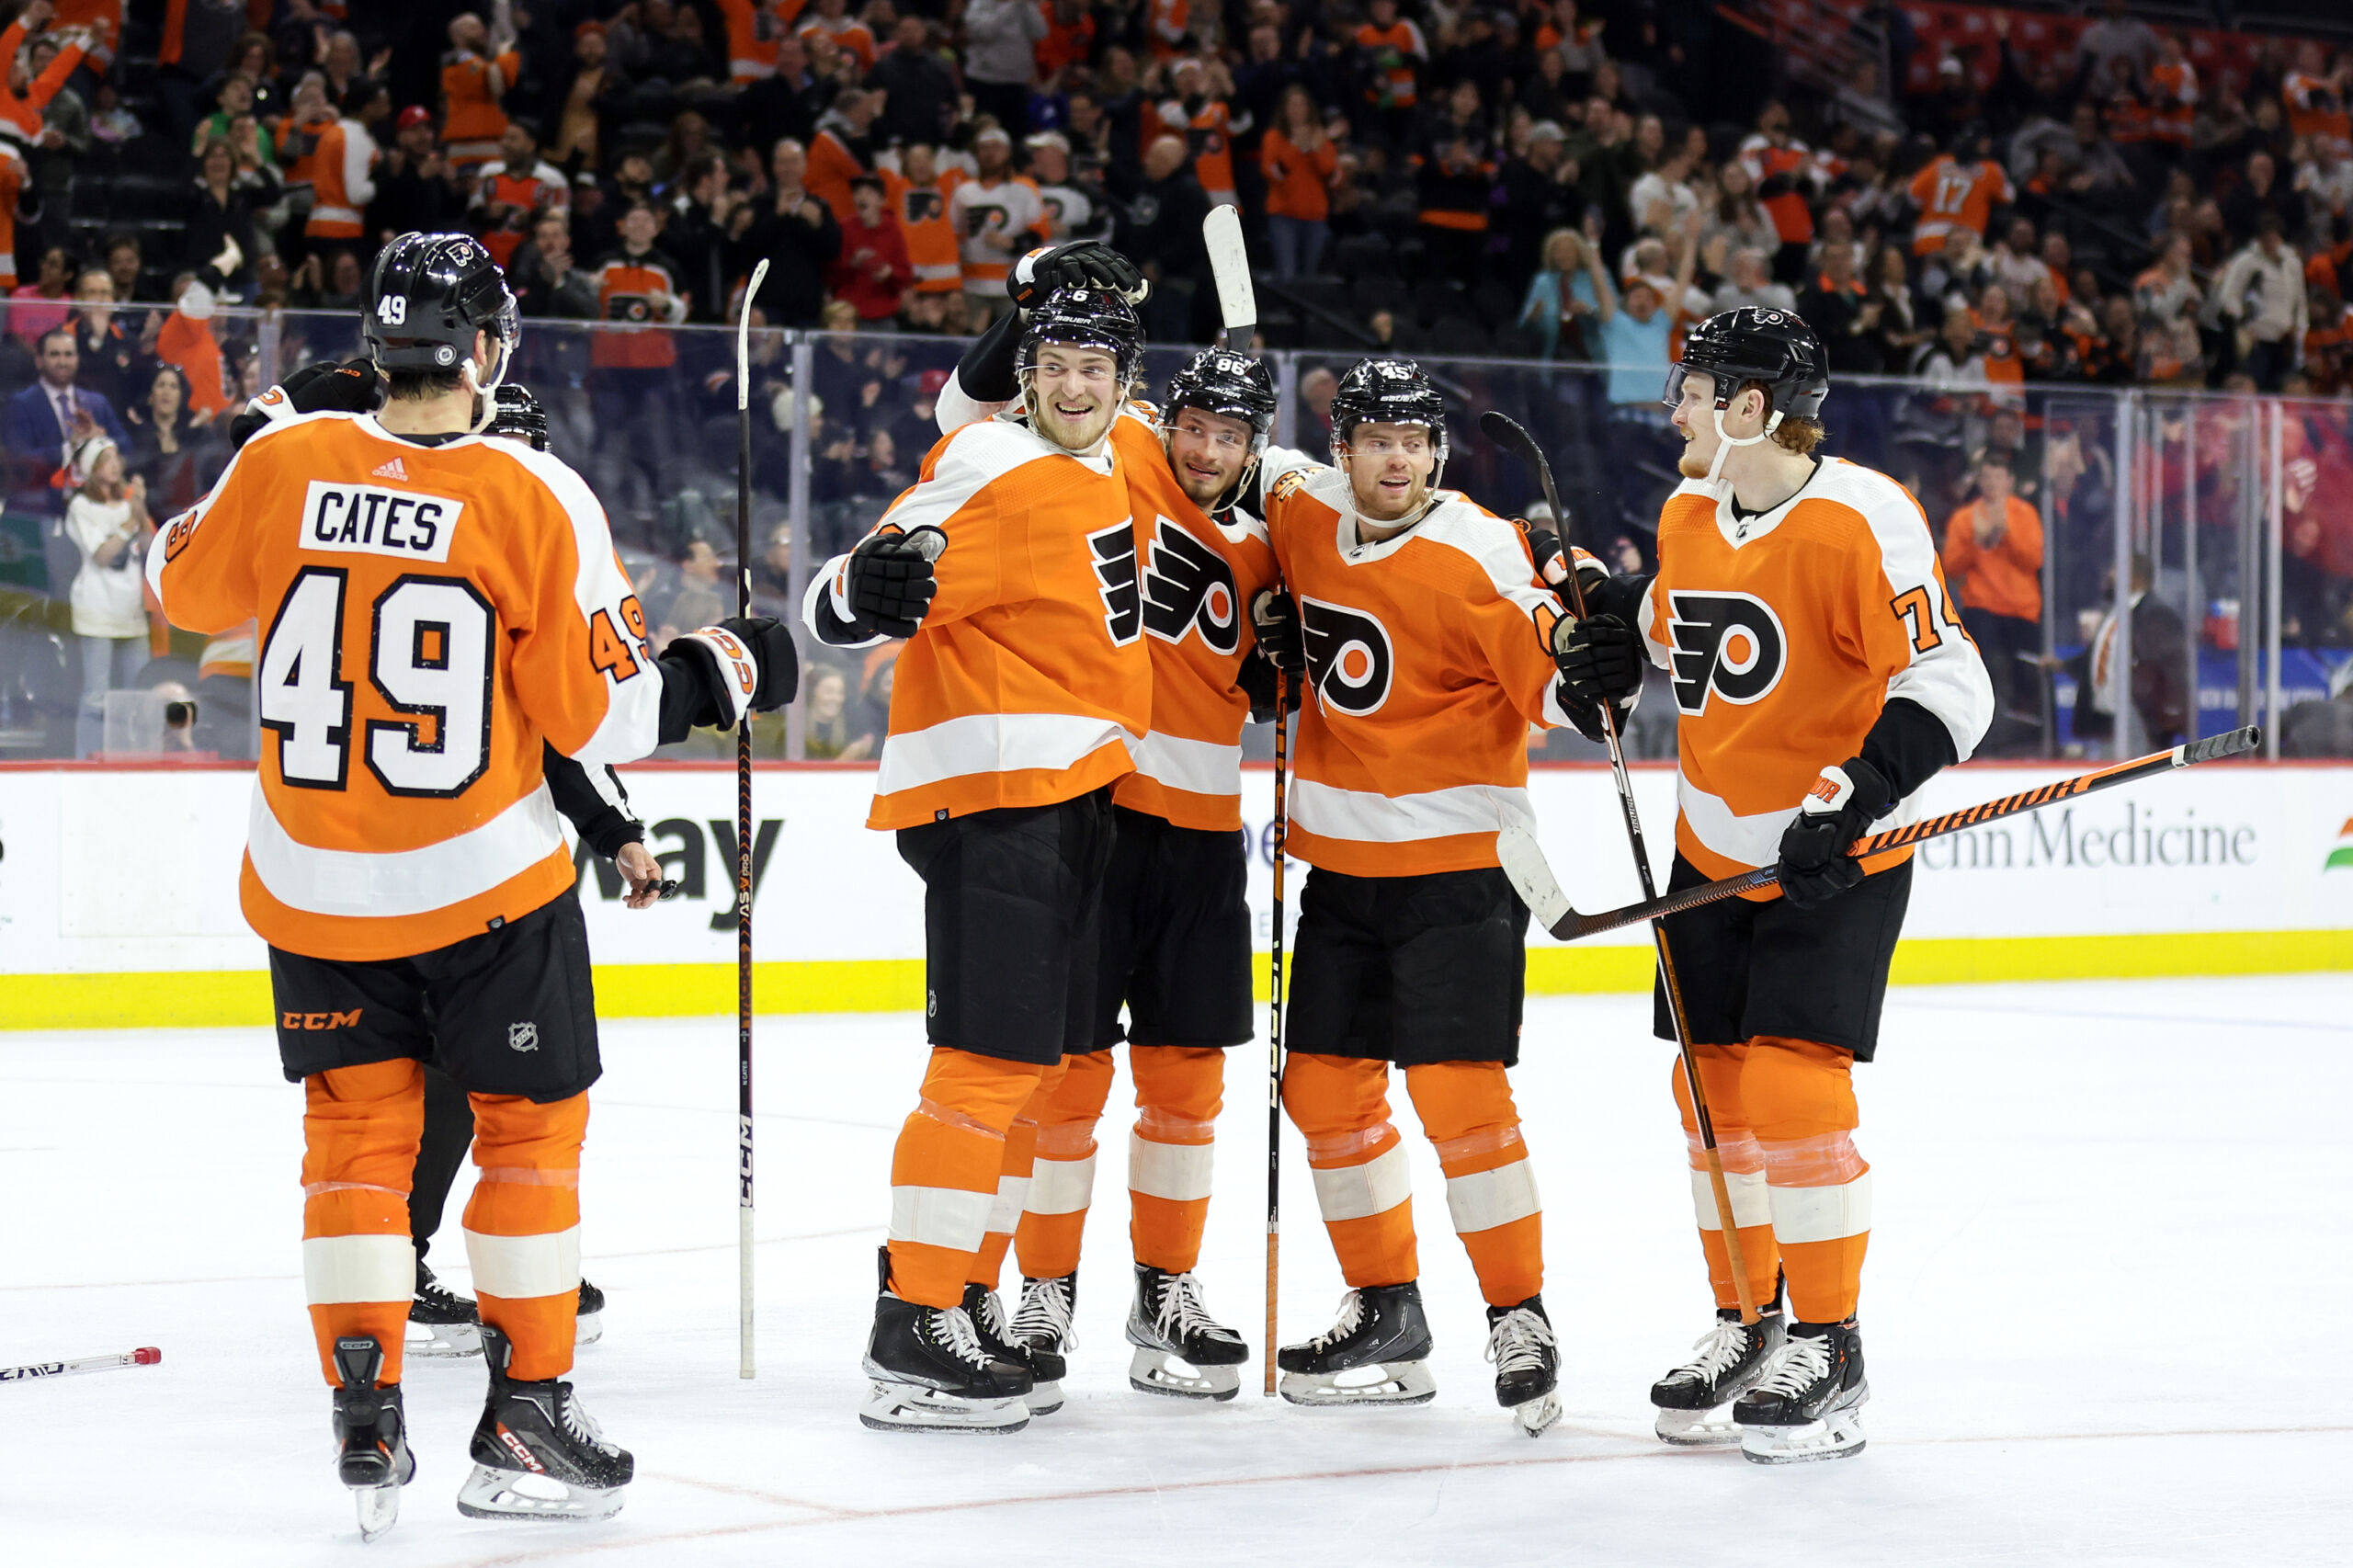 Philadelphia Flyers Announce Opening Night Roster- Foerster, Brink